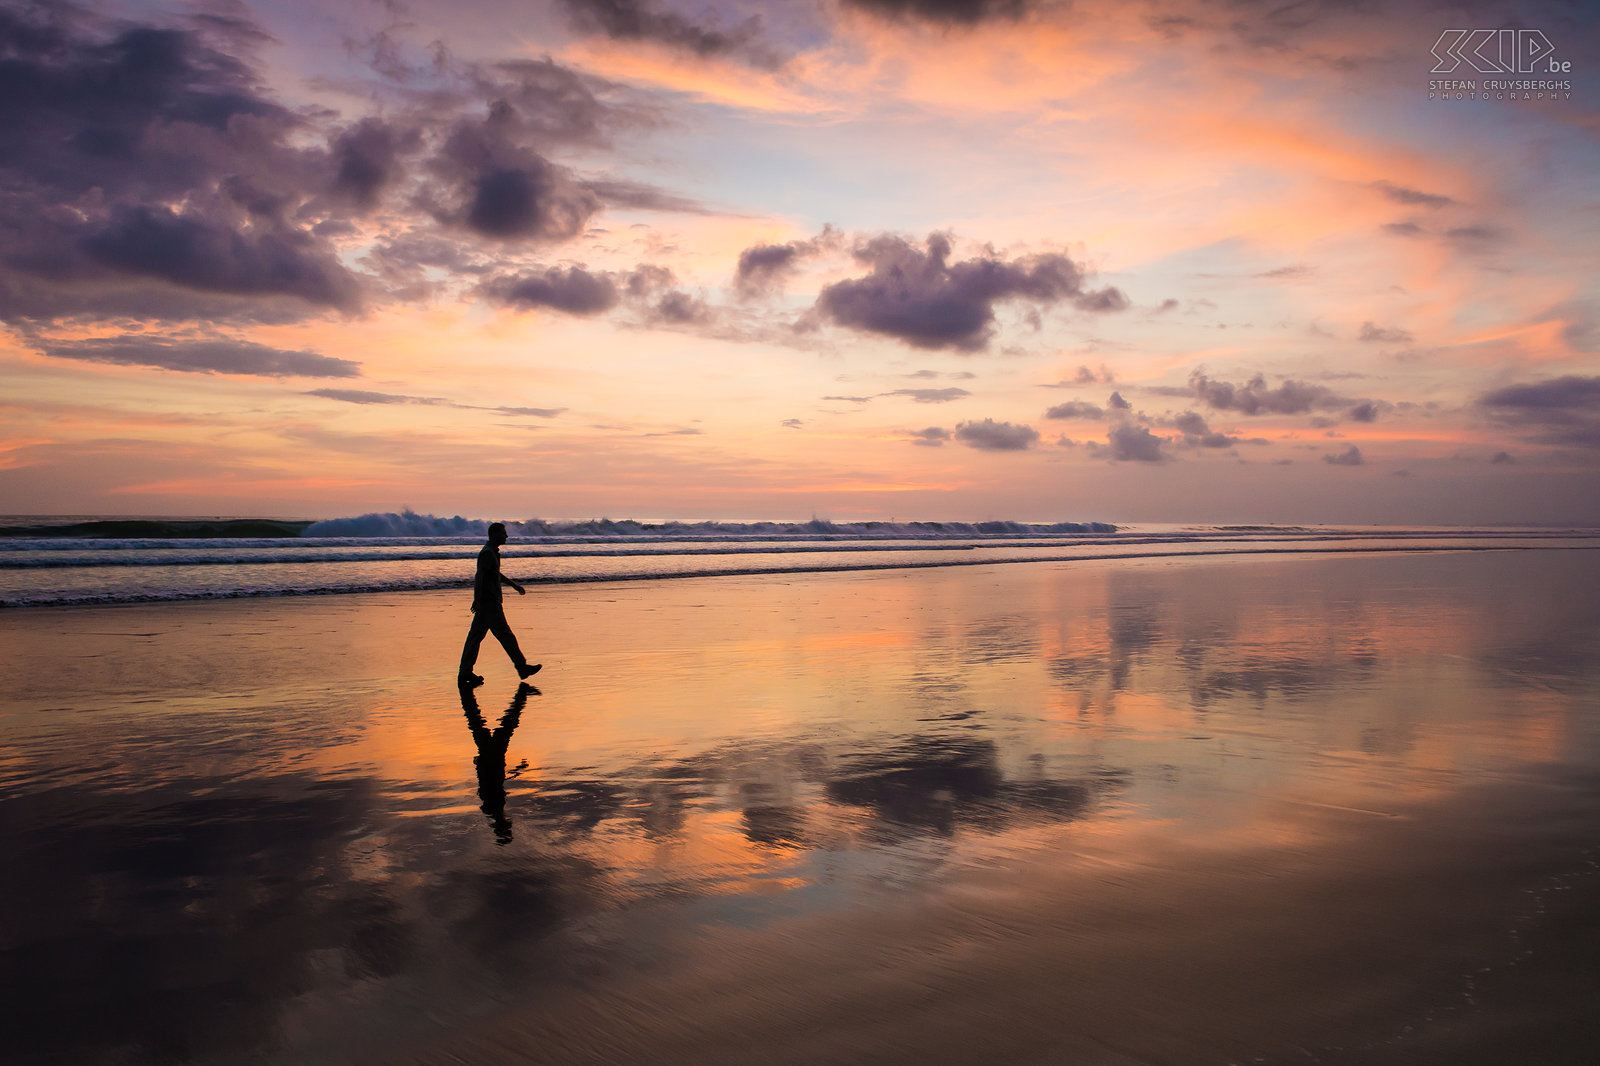 Dominical - Sunset - Stefan A beautiful sunset on the beach of Dominical at low tide. A 'selfie'. Stefan Cruysberghs